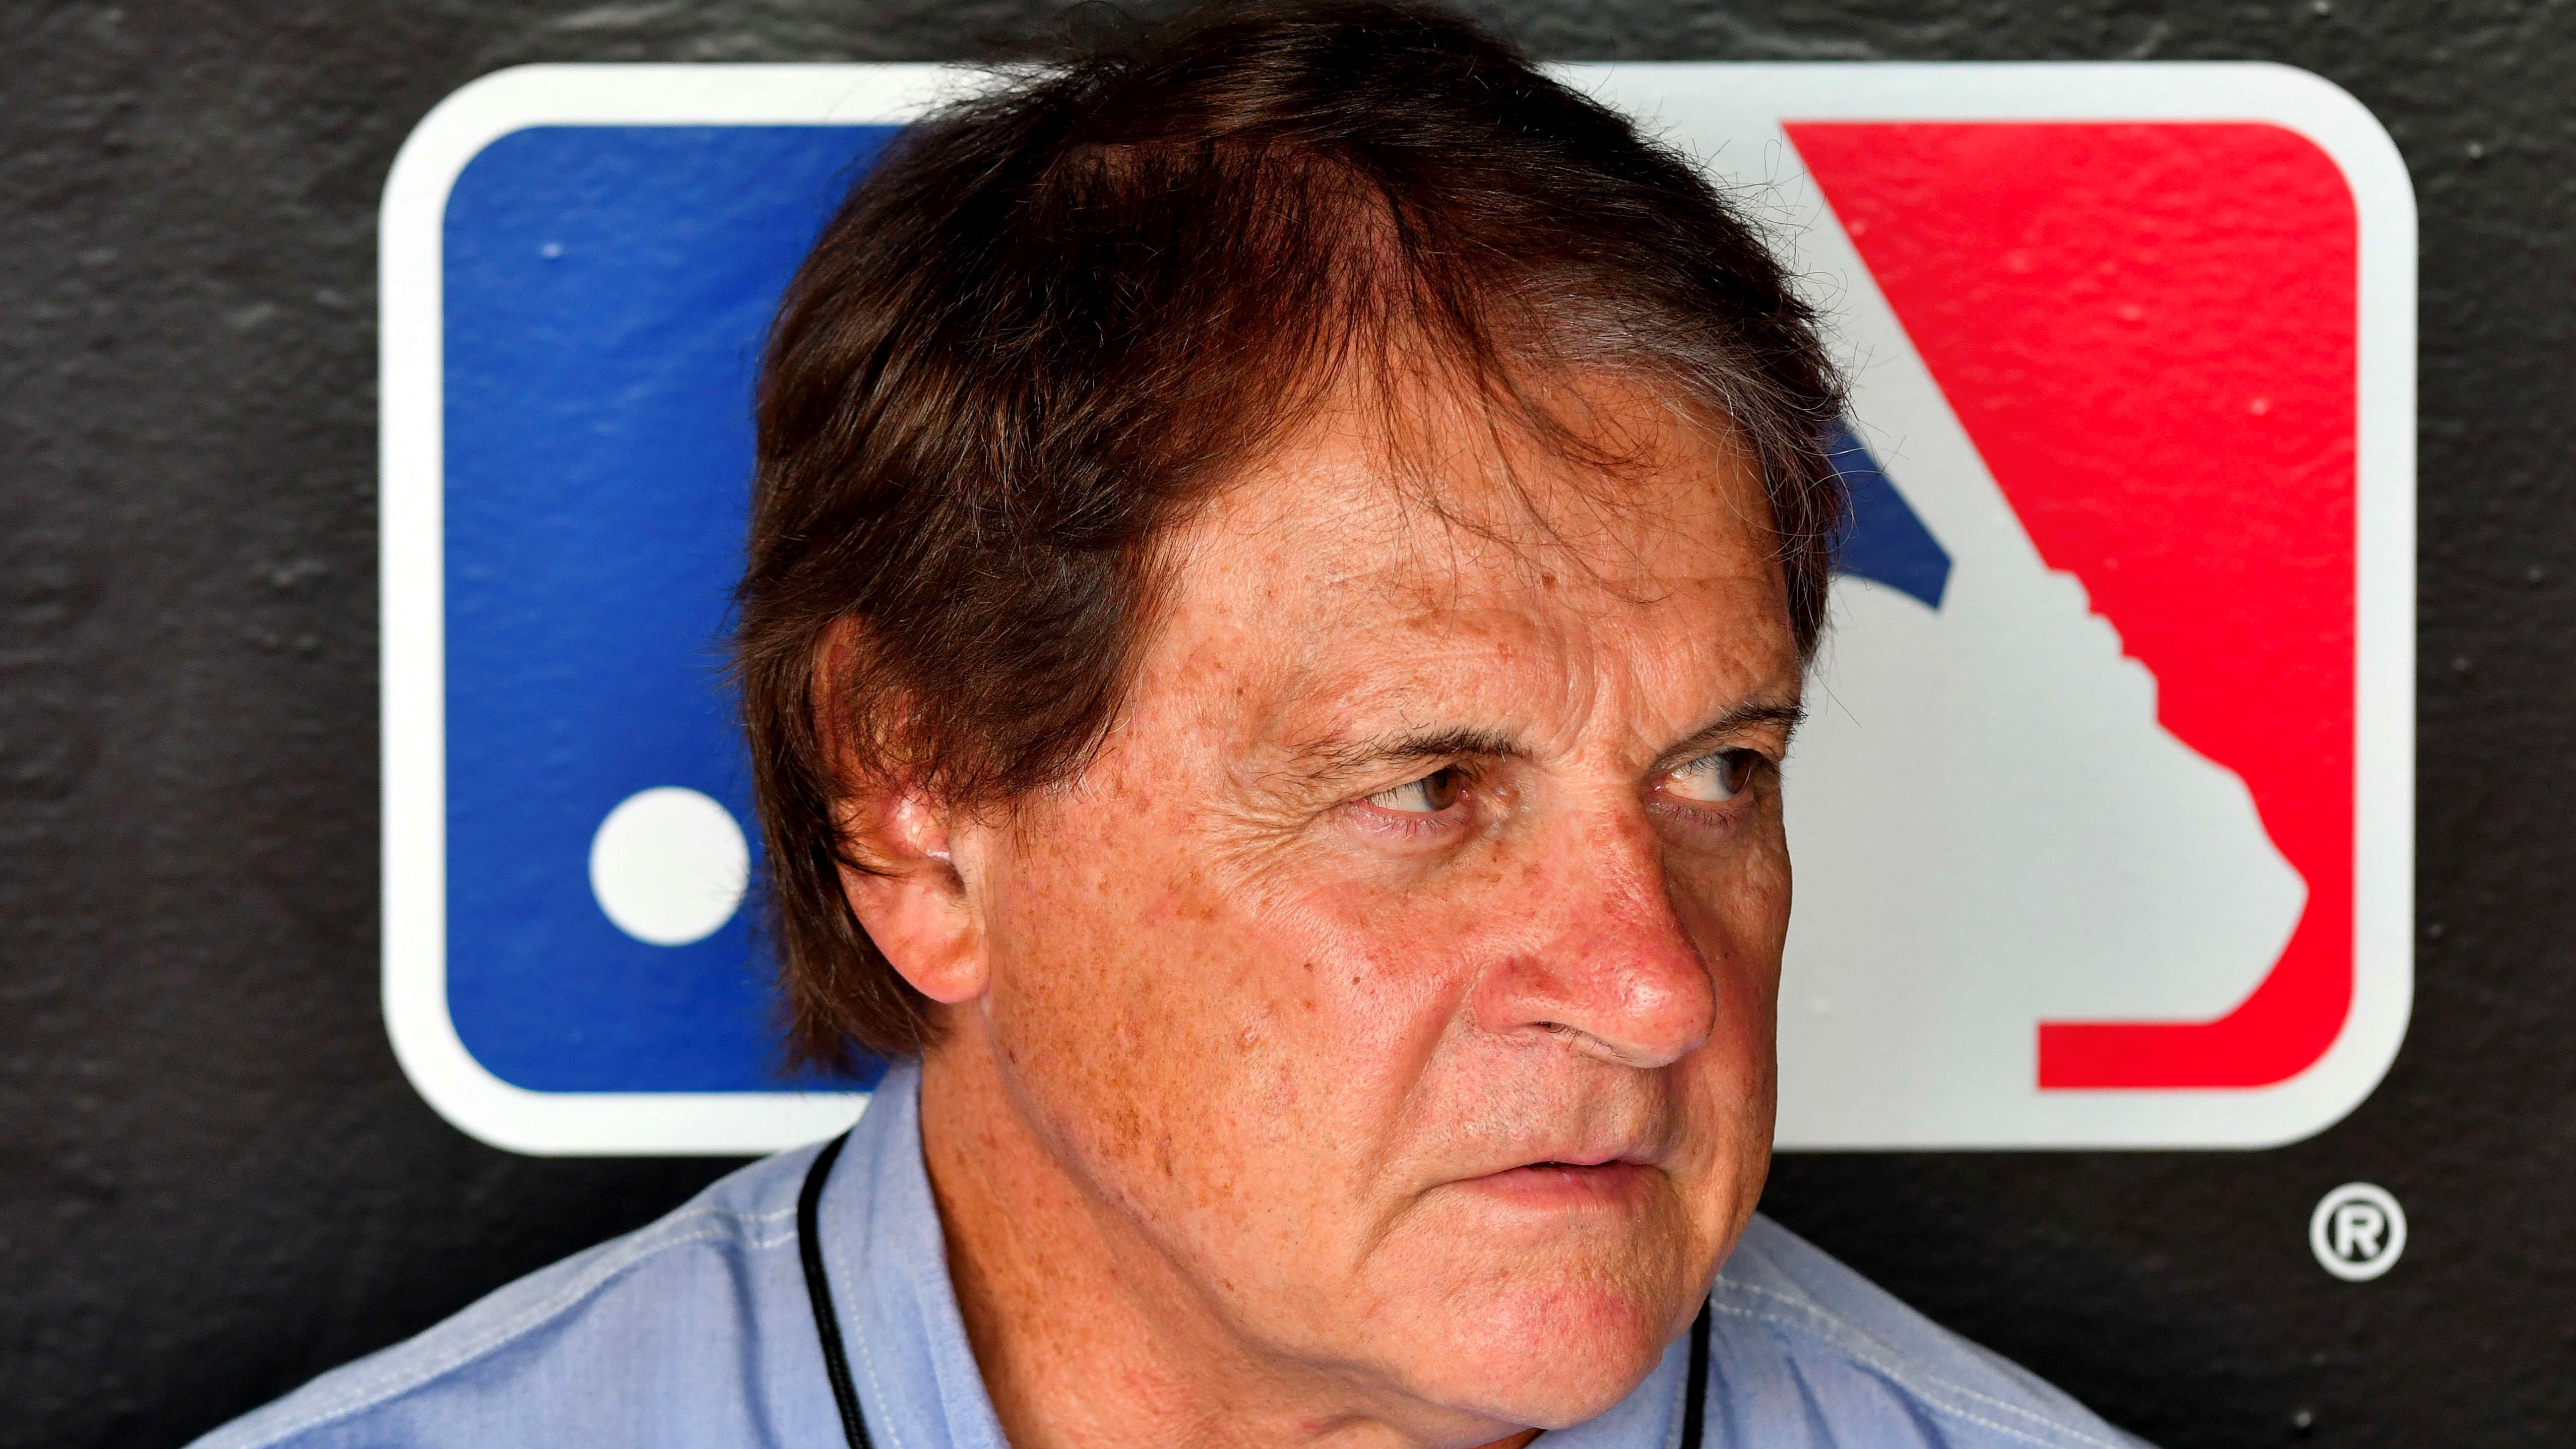 Tony La Russa's timeline from White Sox manager in 1979 to new era